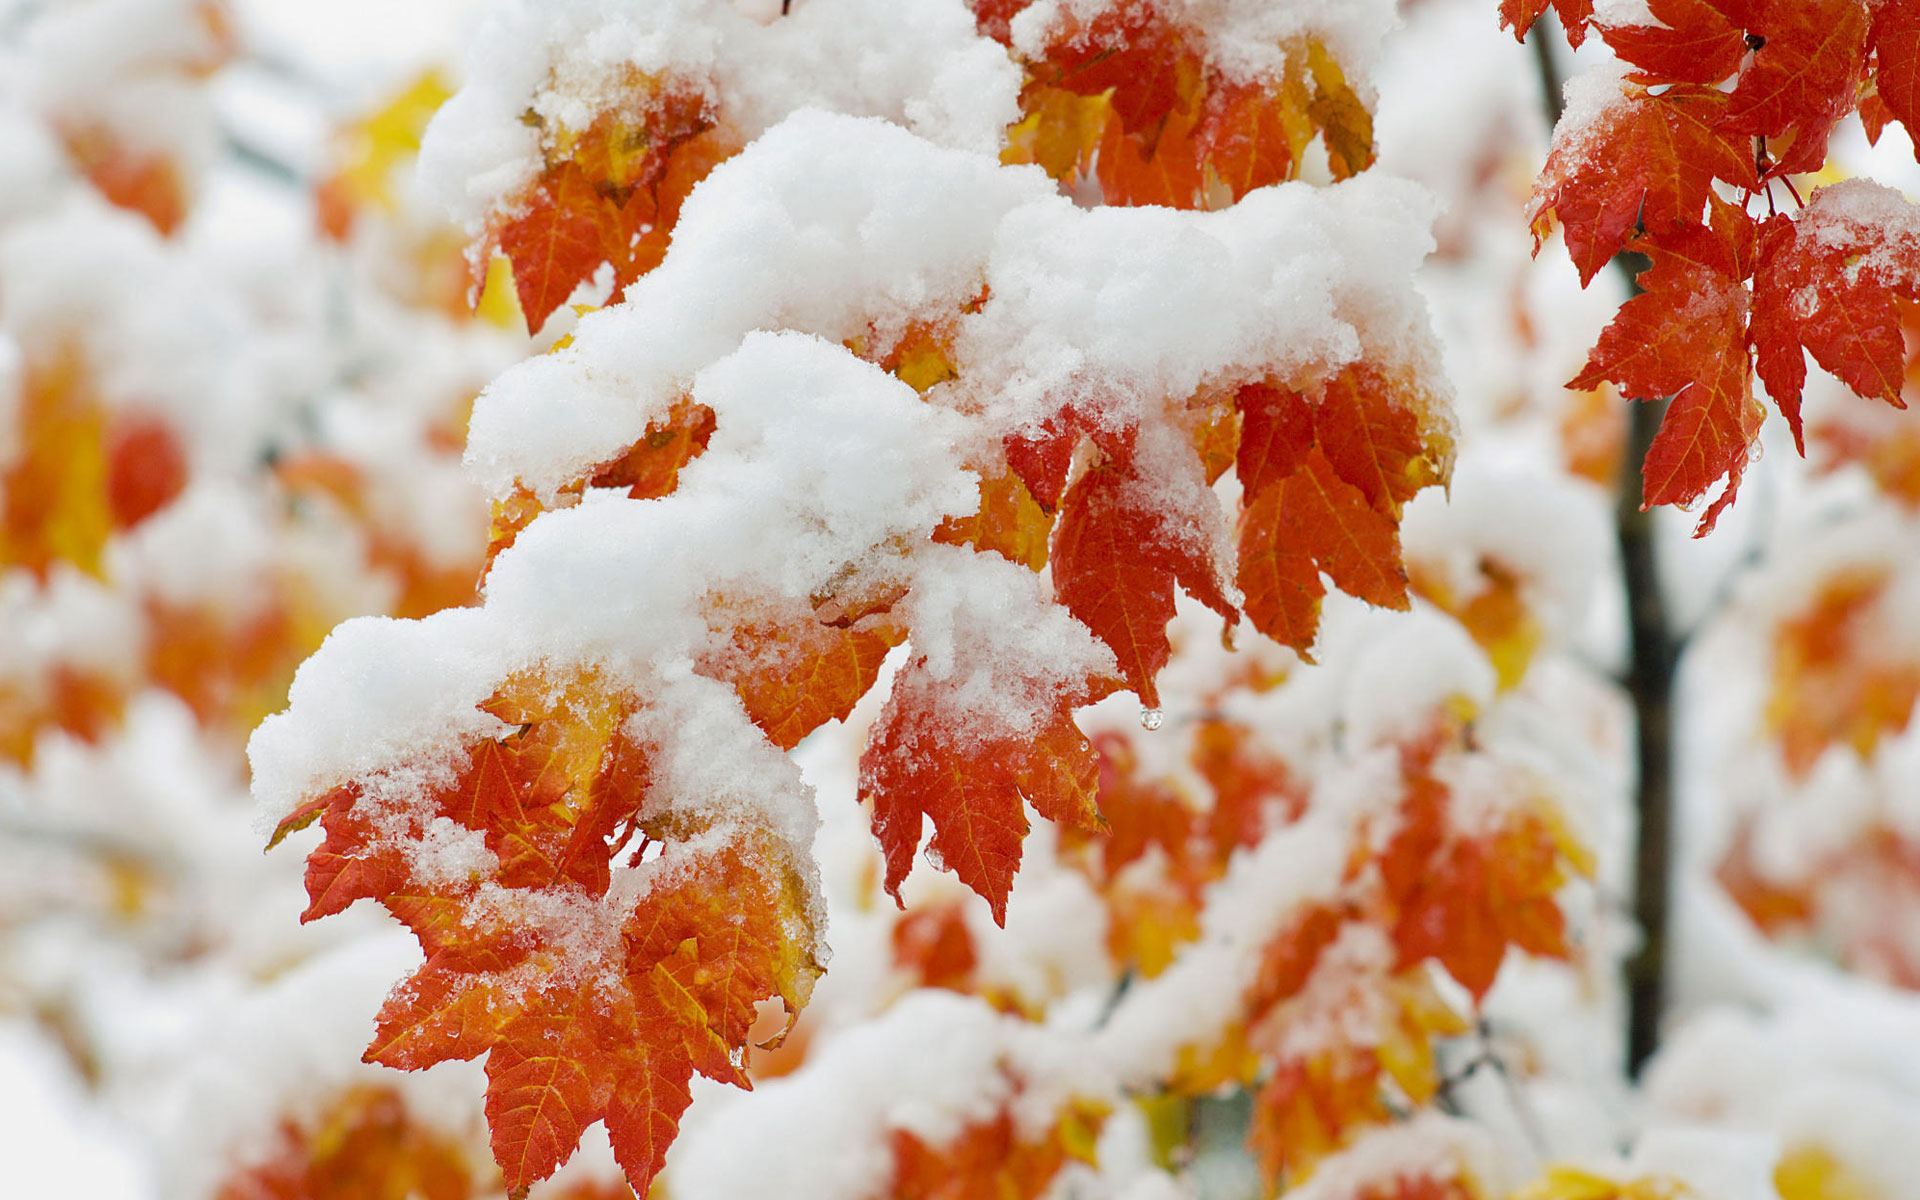 Early Snowfall - Snow On Autumn Leaves - HD Wallpaper 